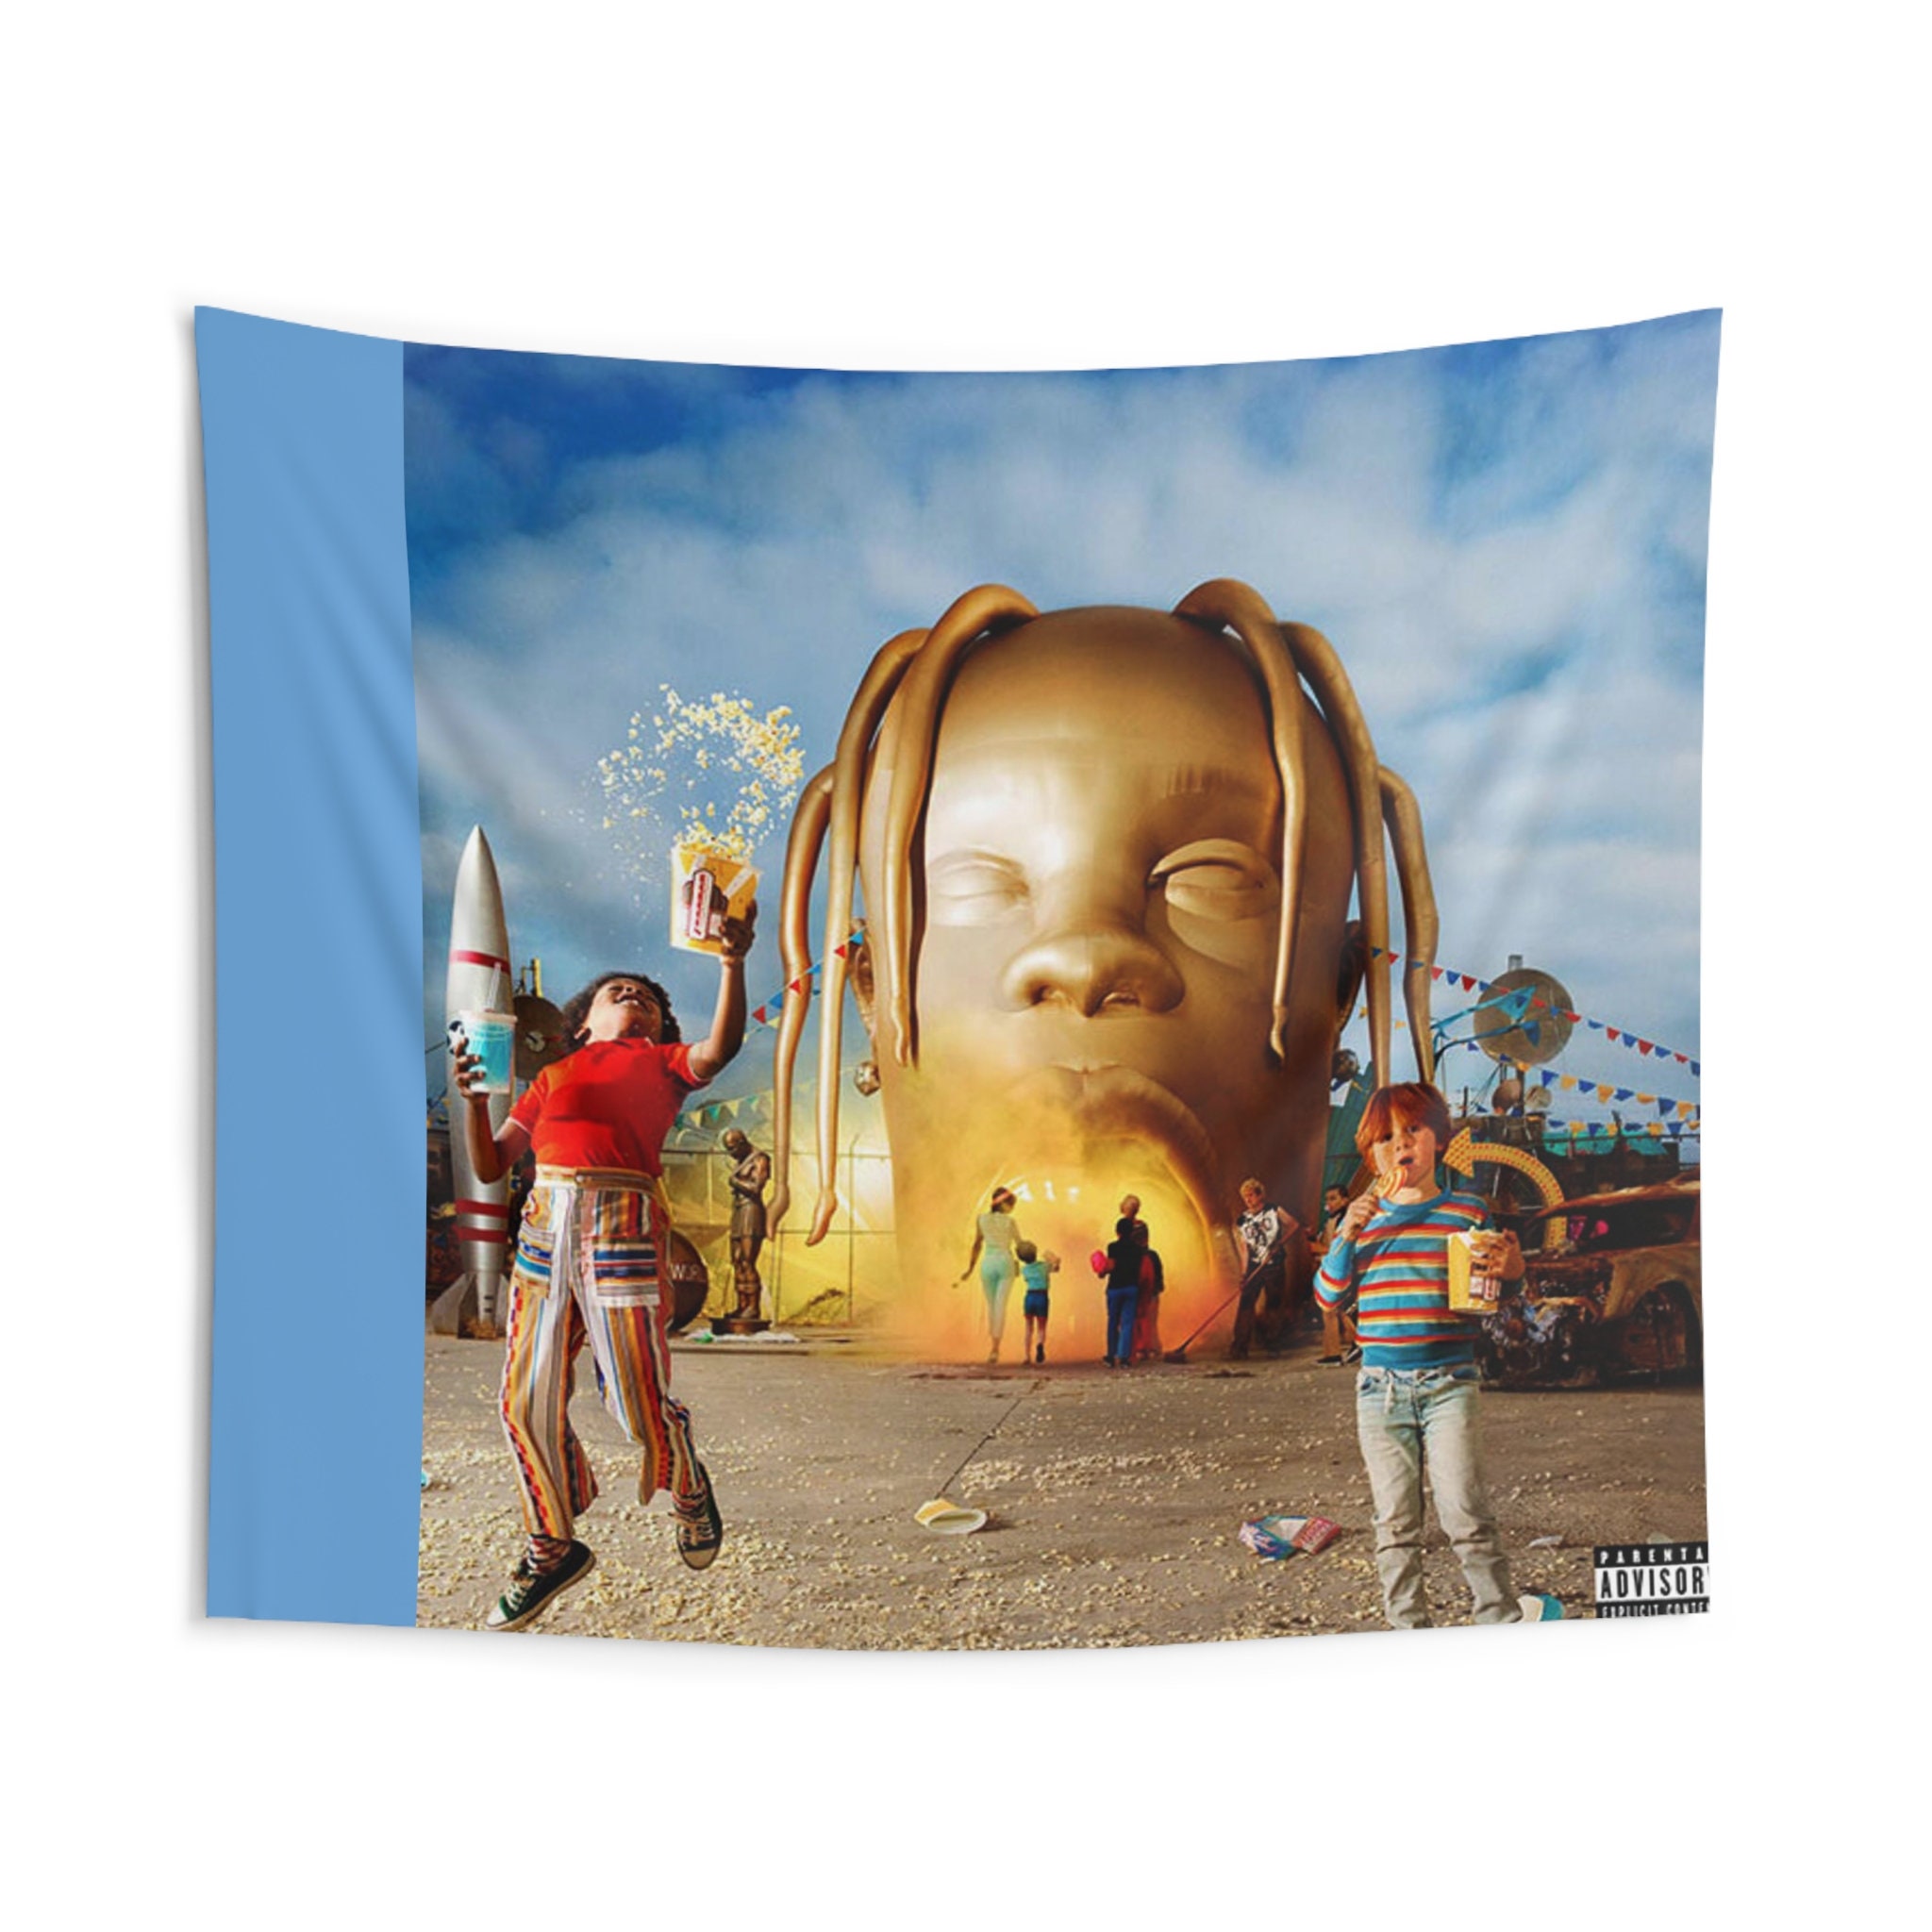 Feiteng Travis-Scott Astroworld Tapestry Living Room Bedroom Home Decor  Tapestries Art Wall Hanging Blanket 60x51in : : Home & Kitchen